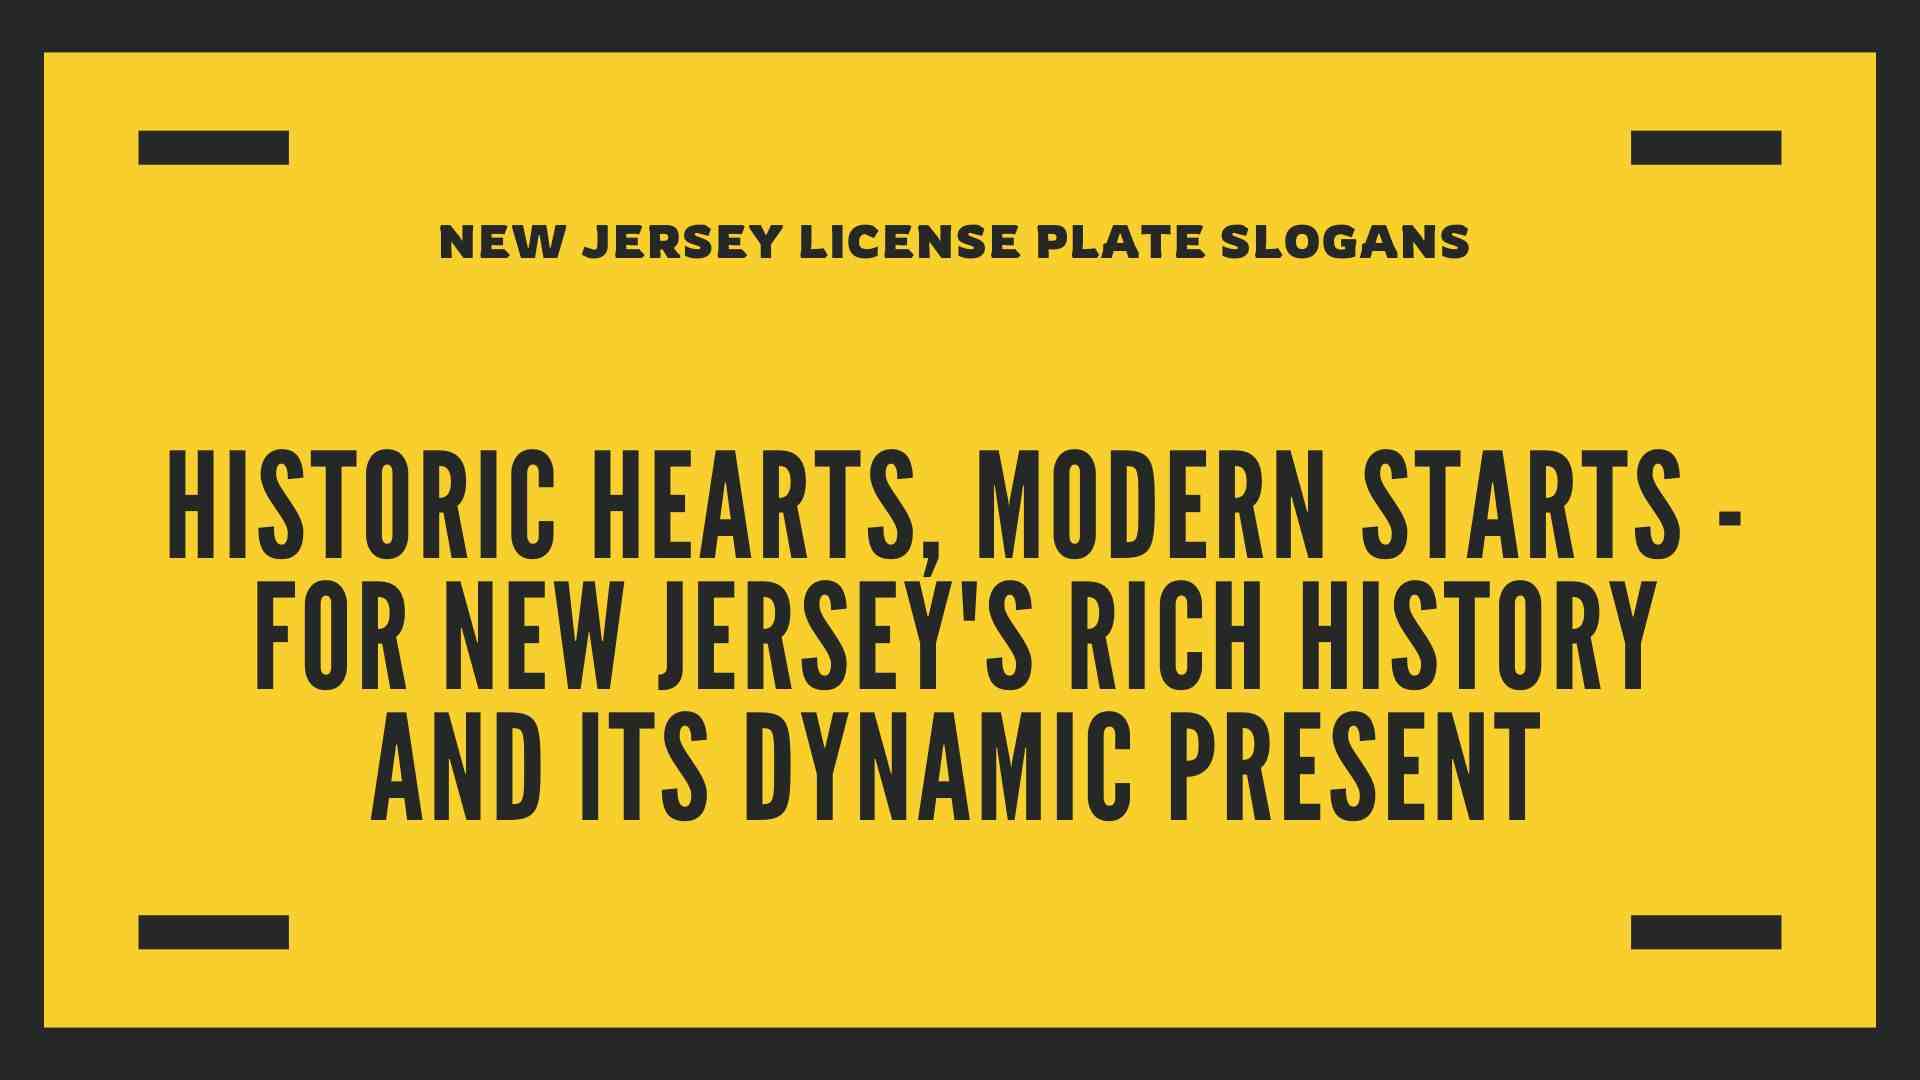 New Jersey License Plate Slogans